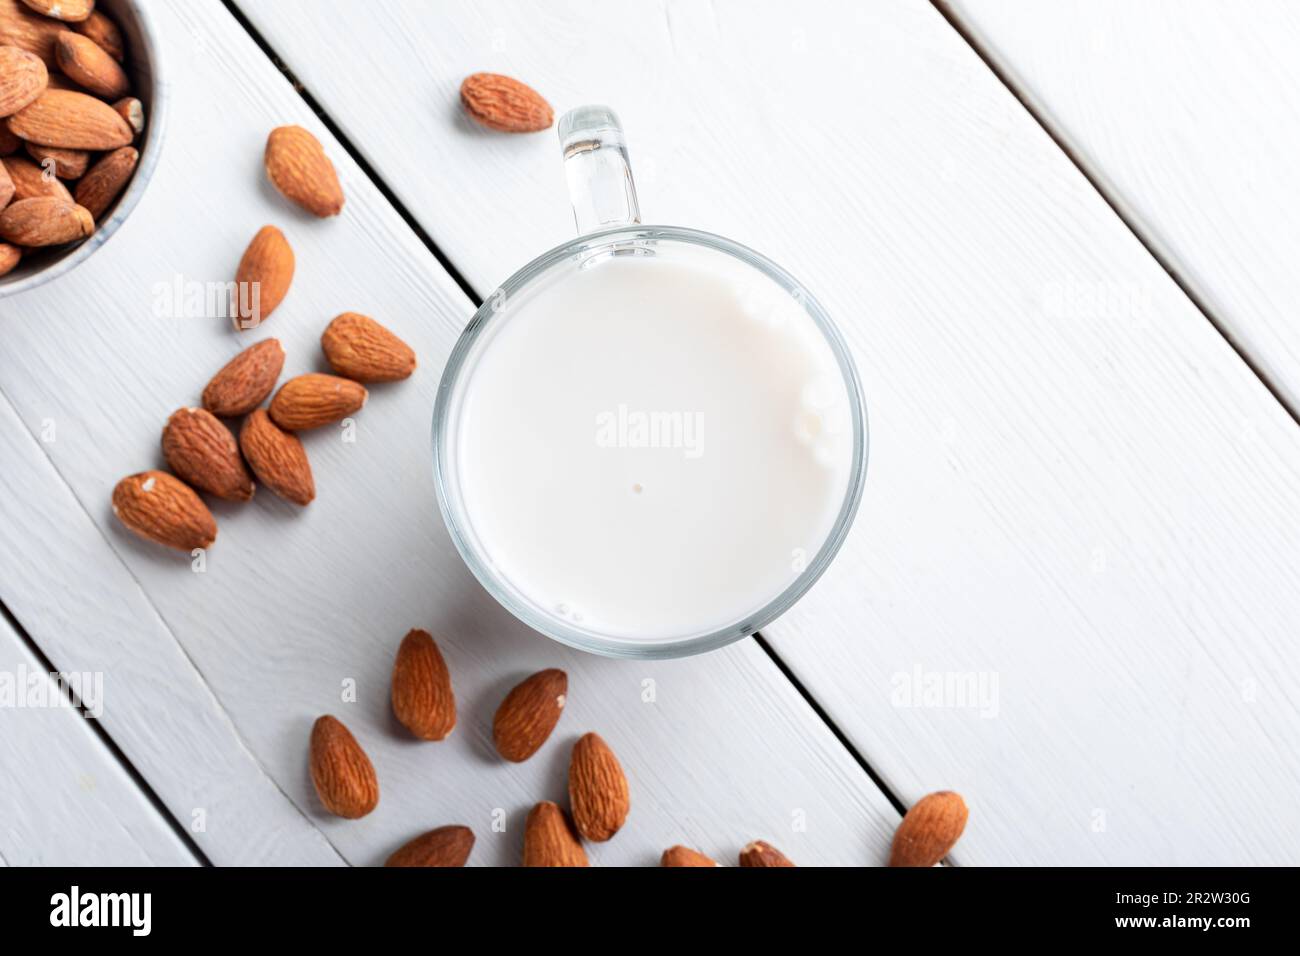 Glass of almond milk and nuts on white background, top view. Almond milk in glass and almond nuts on a wooden background. Stock Photo